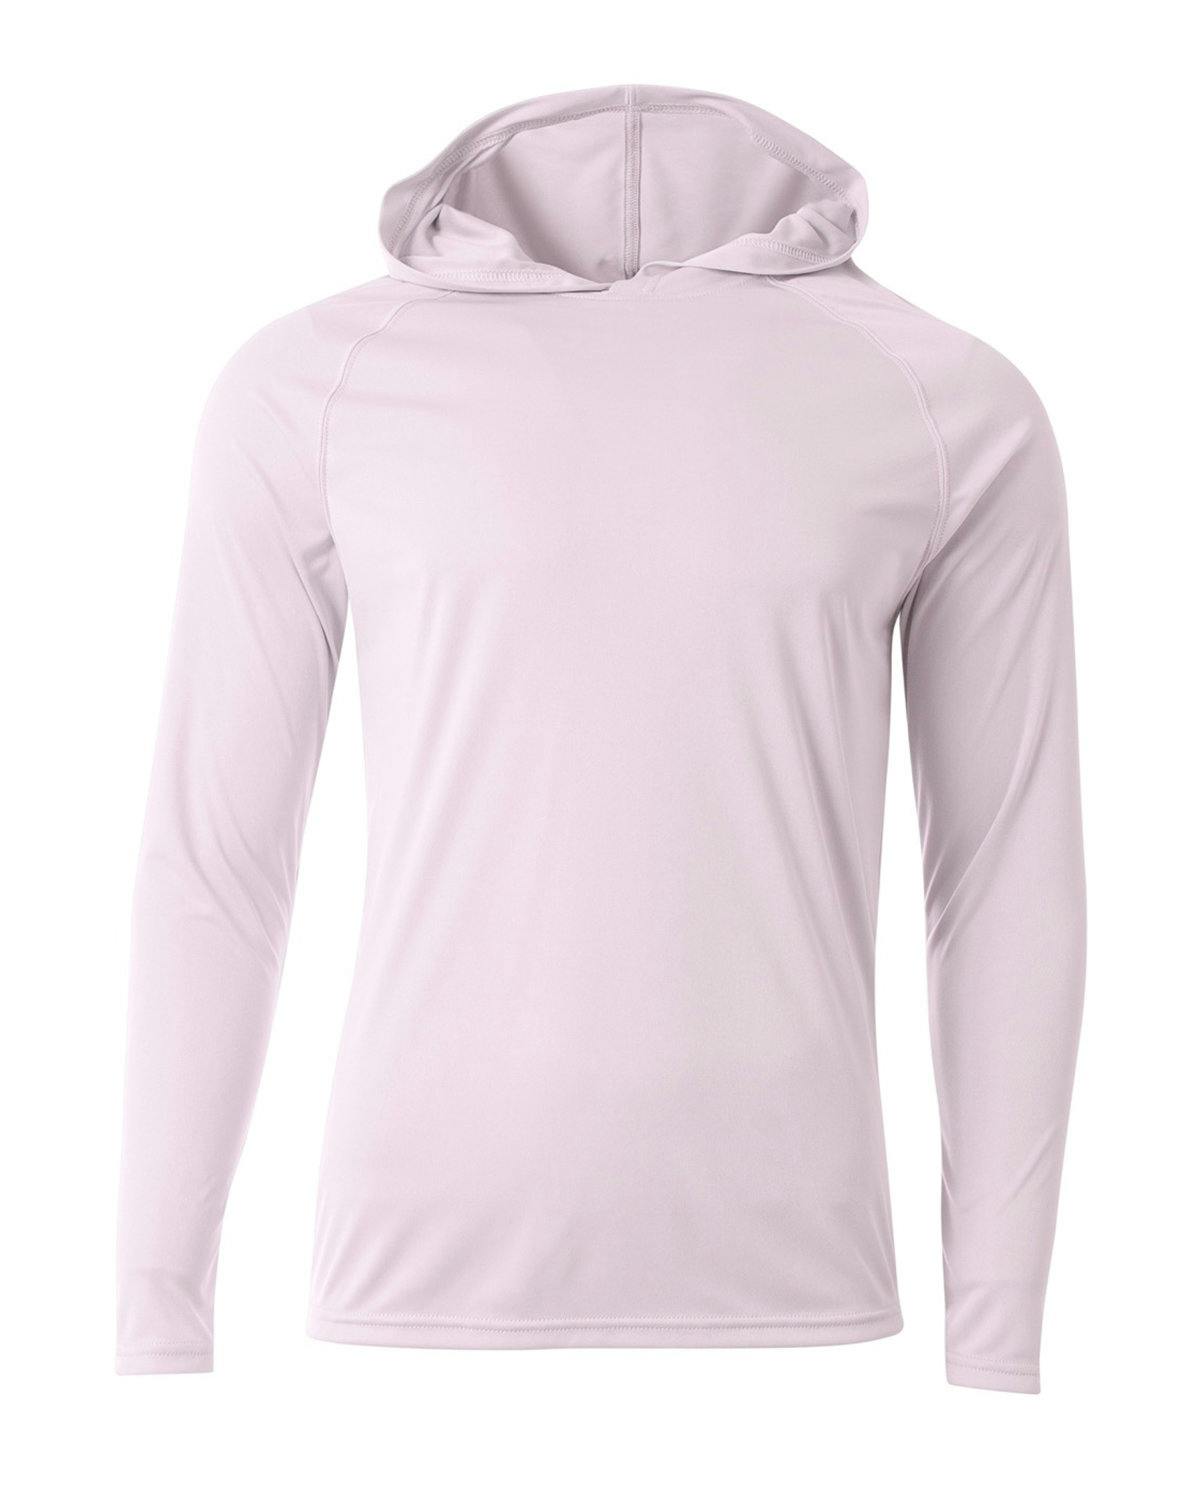 Image for Men's Cooling Performance Long-Sleeve Hooded T-shirt